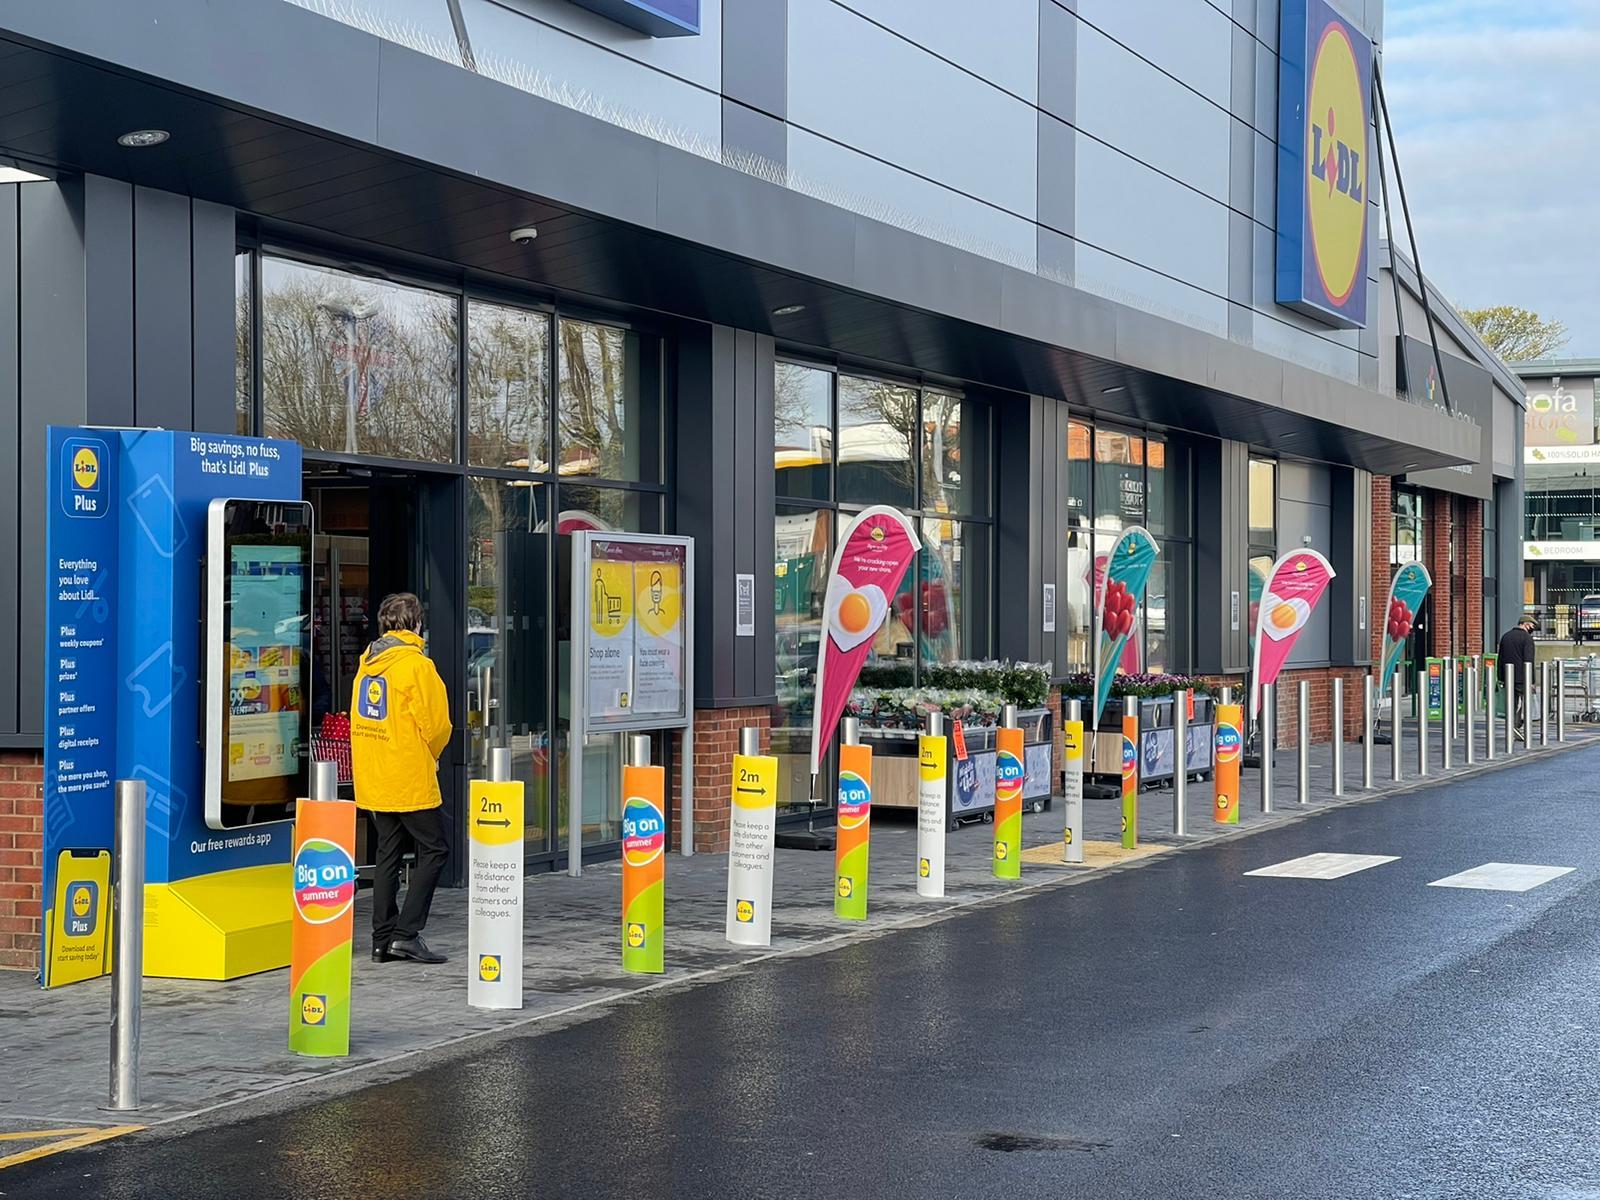 A new Lidl supermarket has been opened at the Goldstone Retail Park in Hove